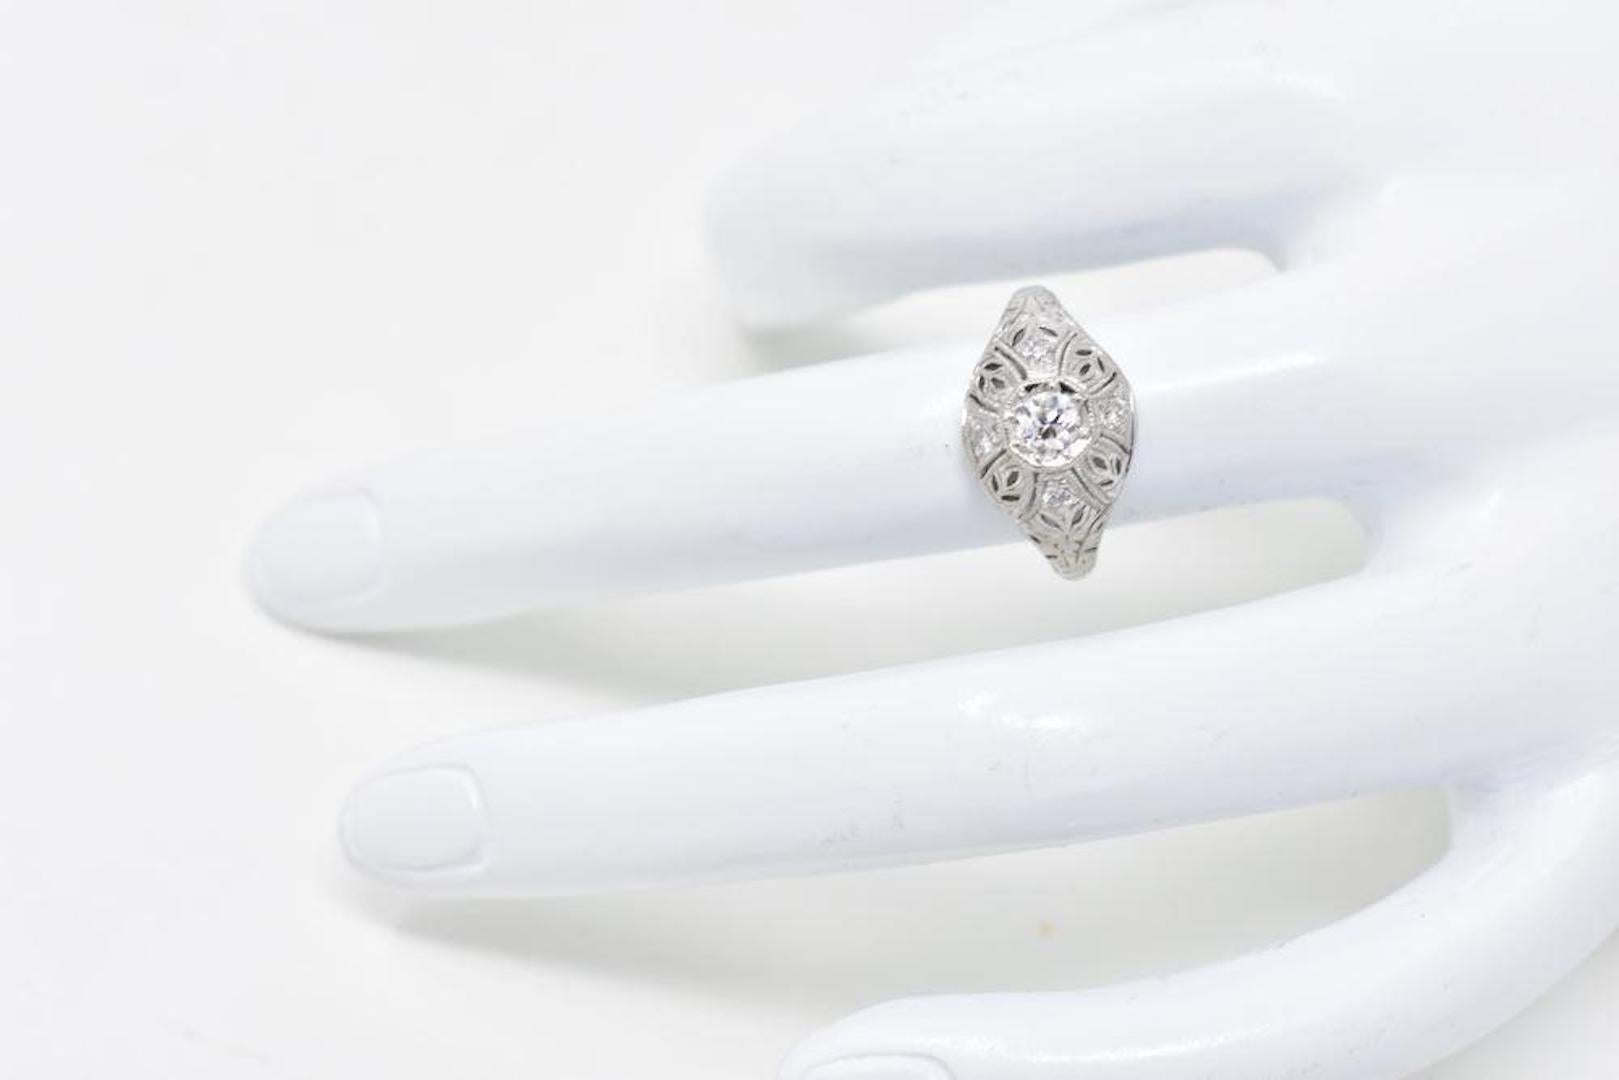 Lovely Art Deco 18K white gold engagement ring. Centering an old European cut diamond weighing approximately 0.30 carats, F color and VS clarity. The mounting is decorated in a lovely symmetric filigree Art Deco design. Delicately placed in the